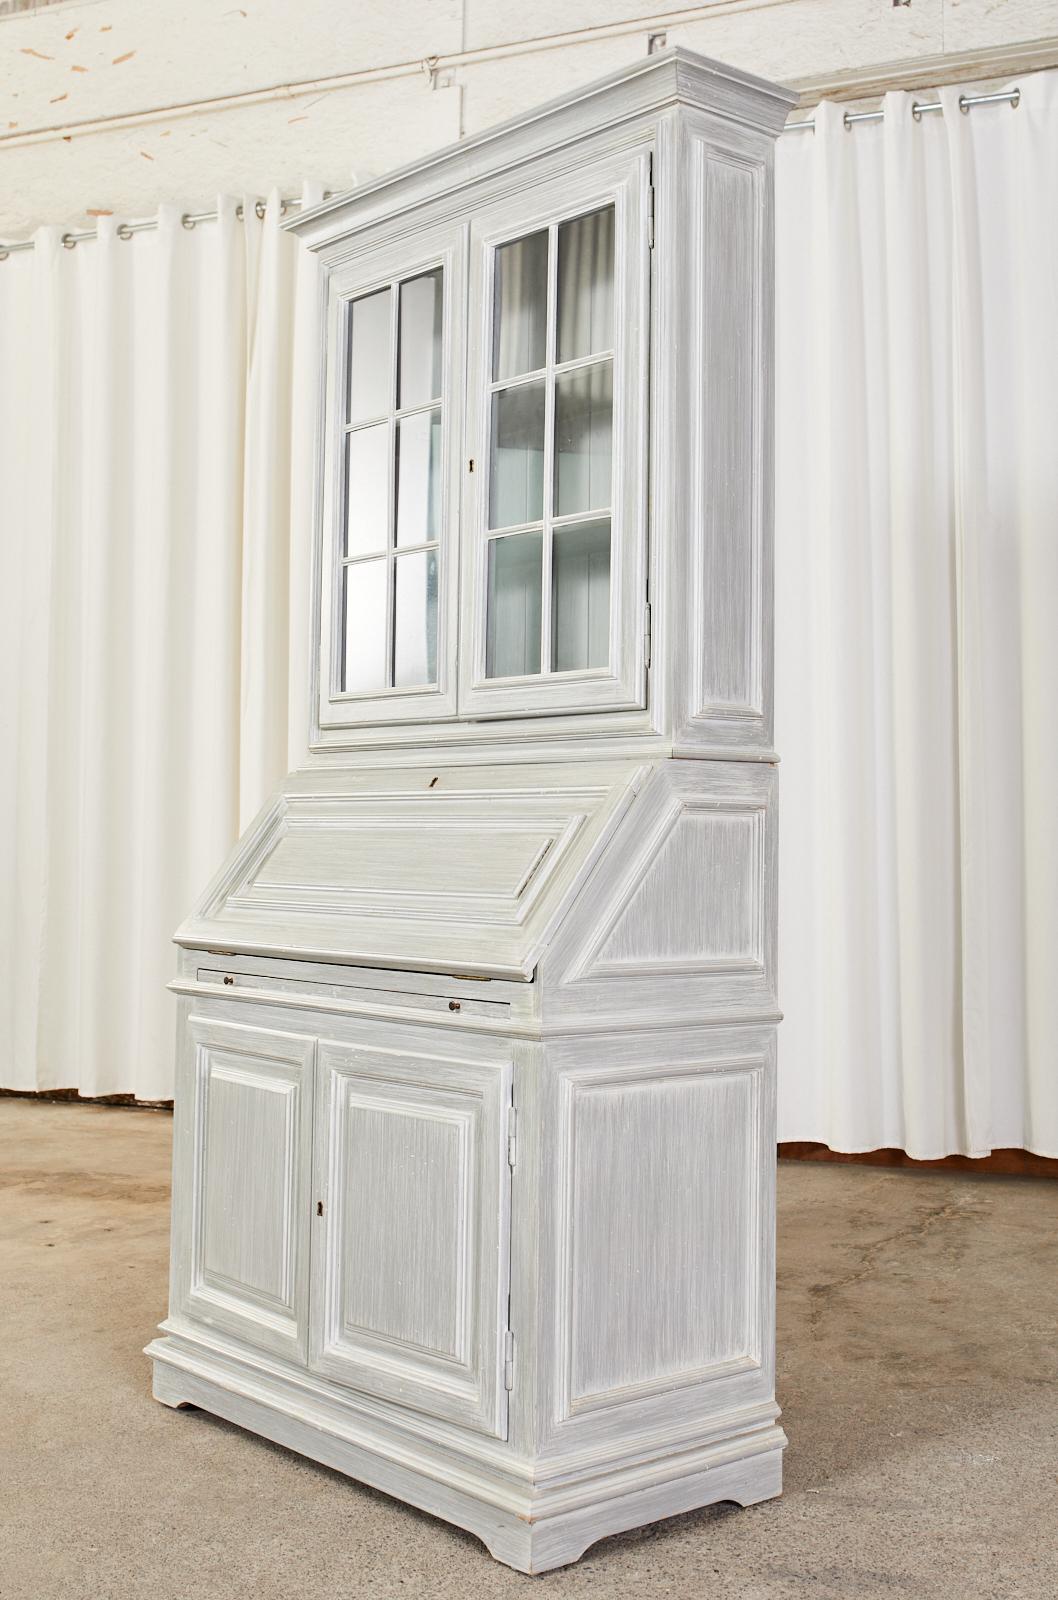 Painted English Georgian style two-piece secretaire bookcase featuring a slant front or drop front desk. The top section has two paneled glass doors opening to a three shelf interior. The drop front opens to a large writing surface with two small